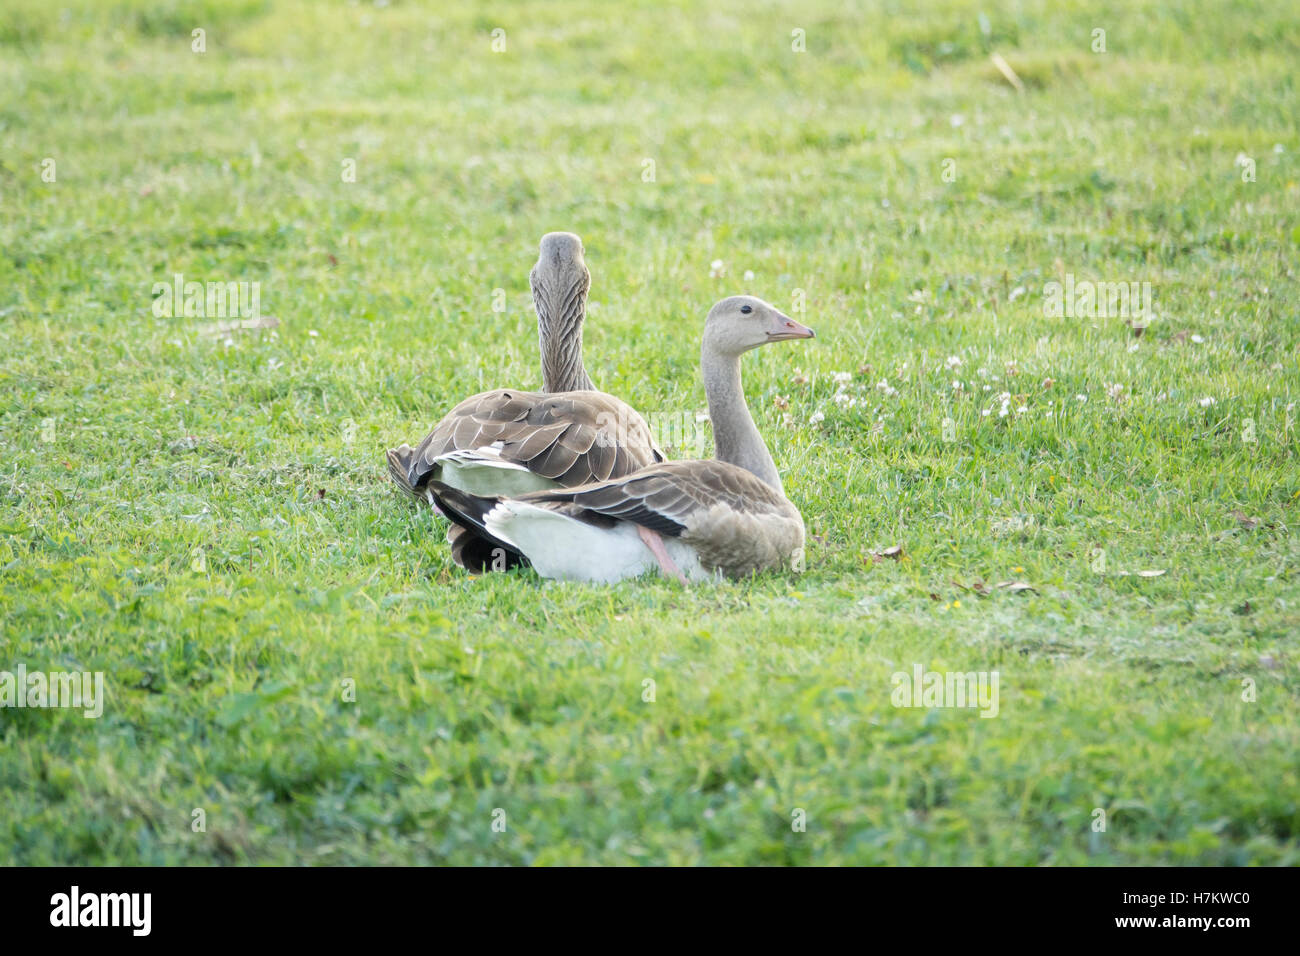 Two greylag geese on green grass. Wildlife nature scene with birds relaxing in a summer meadow. Stock Photo